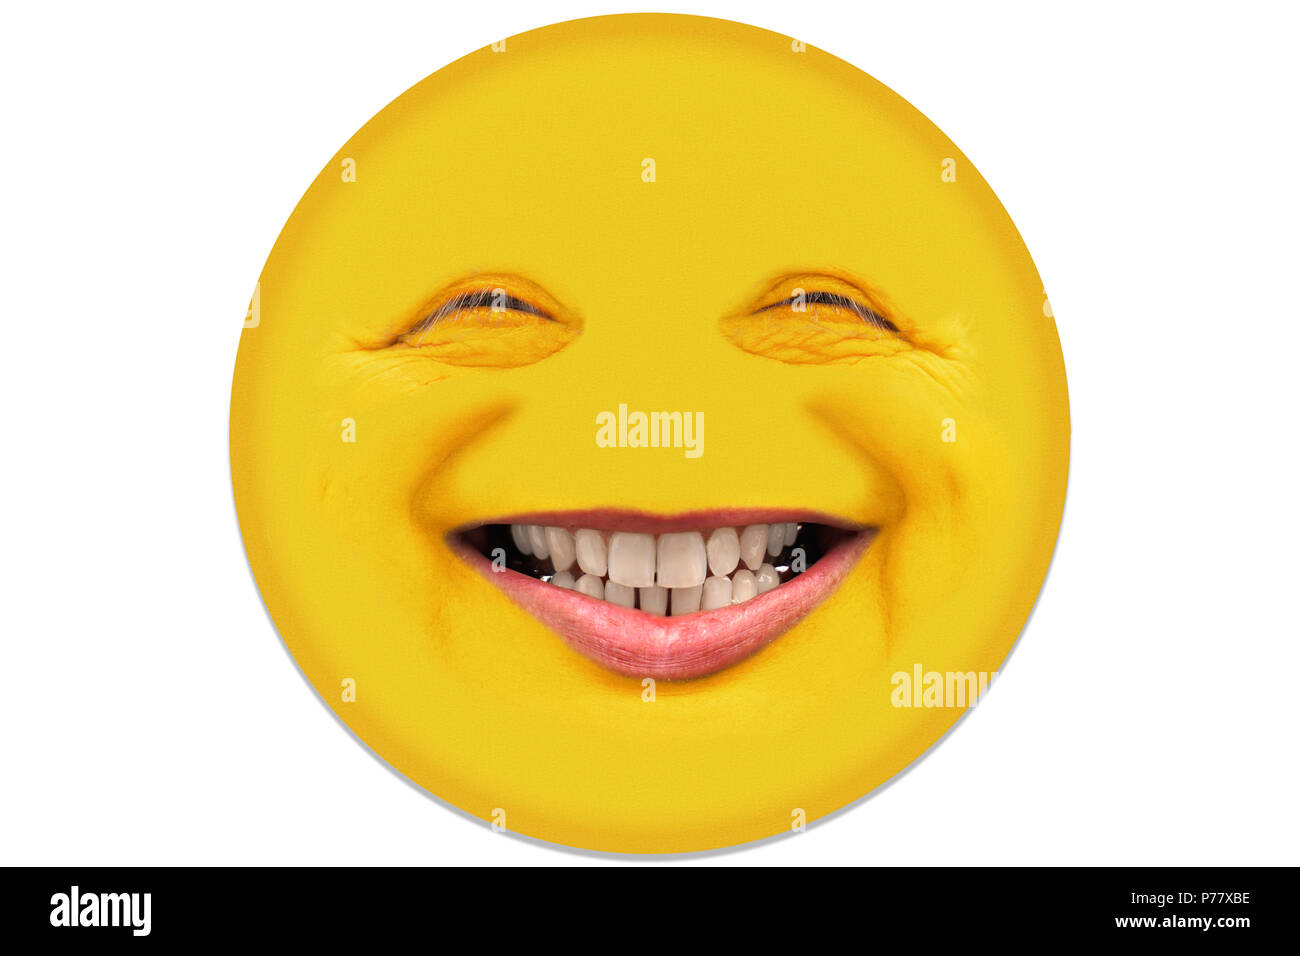 A man in his mid 40s laughs. The facial features have a lot of facial expressions. The face is circular cut out and isolated against white background. Stock Photo